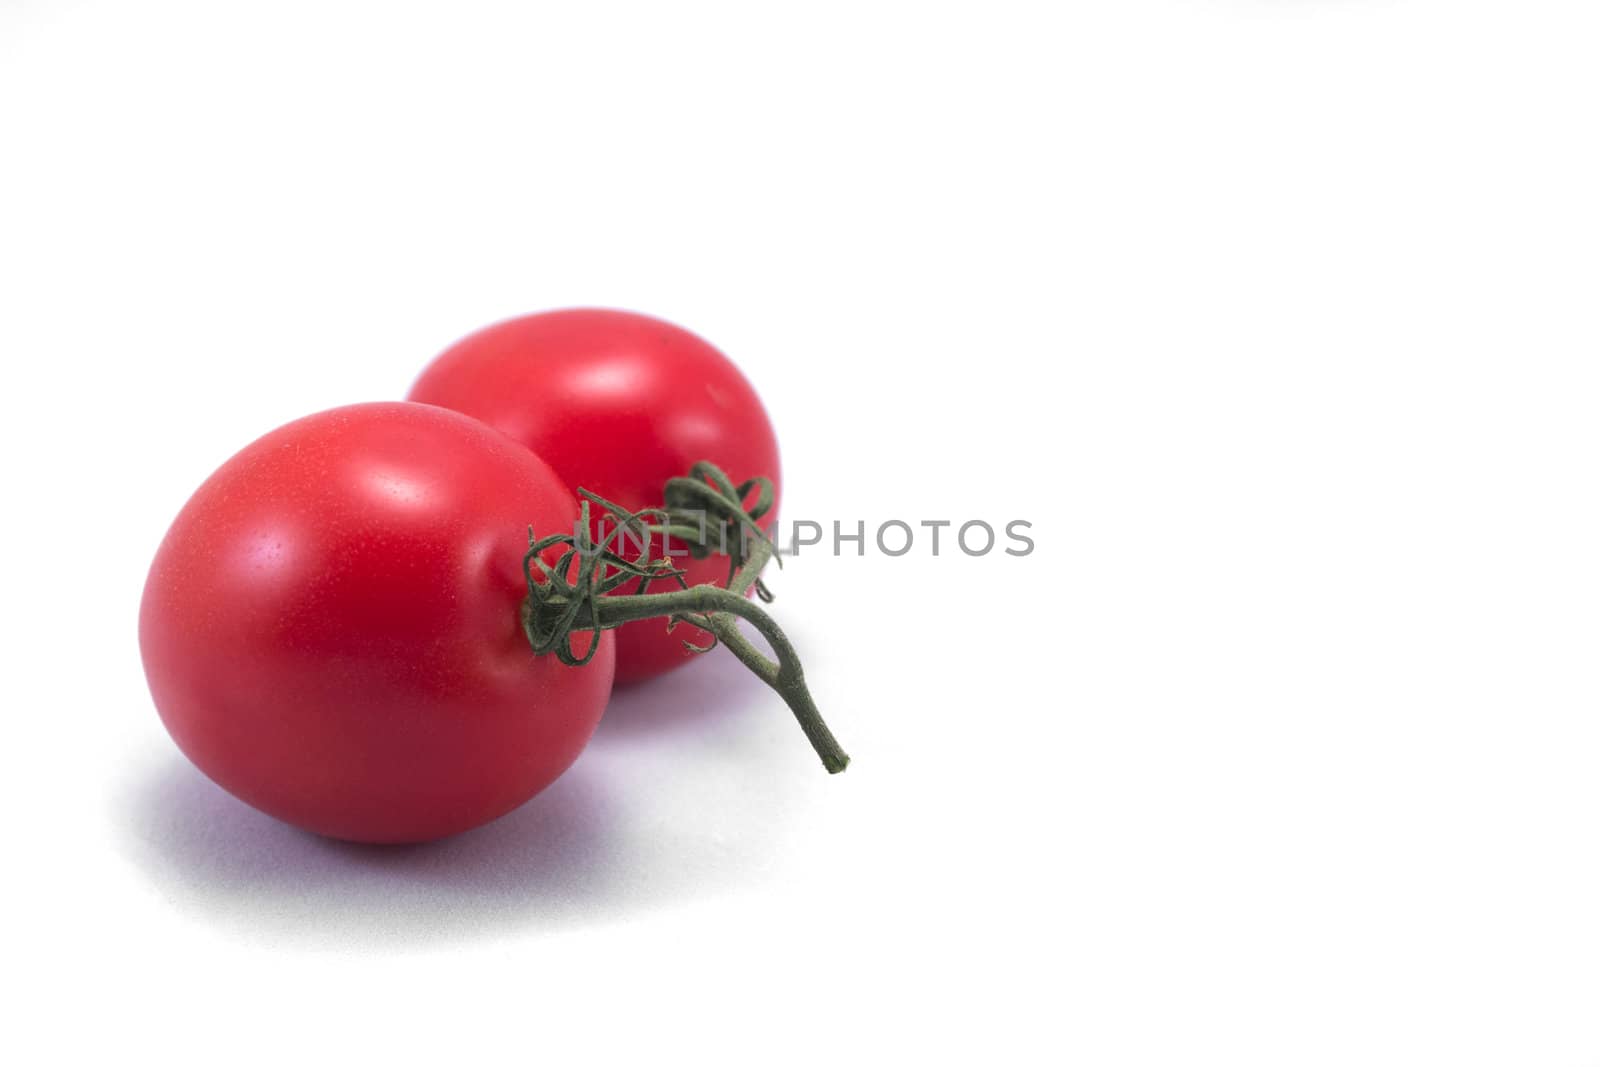 Ripe Tomatoes with vine by jeremywhat